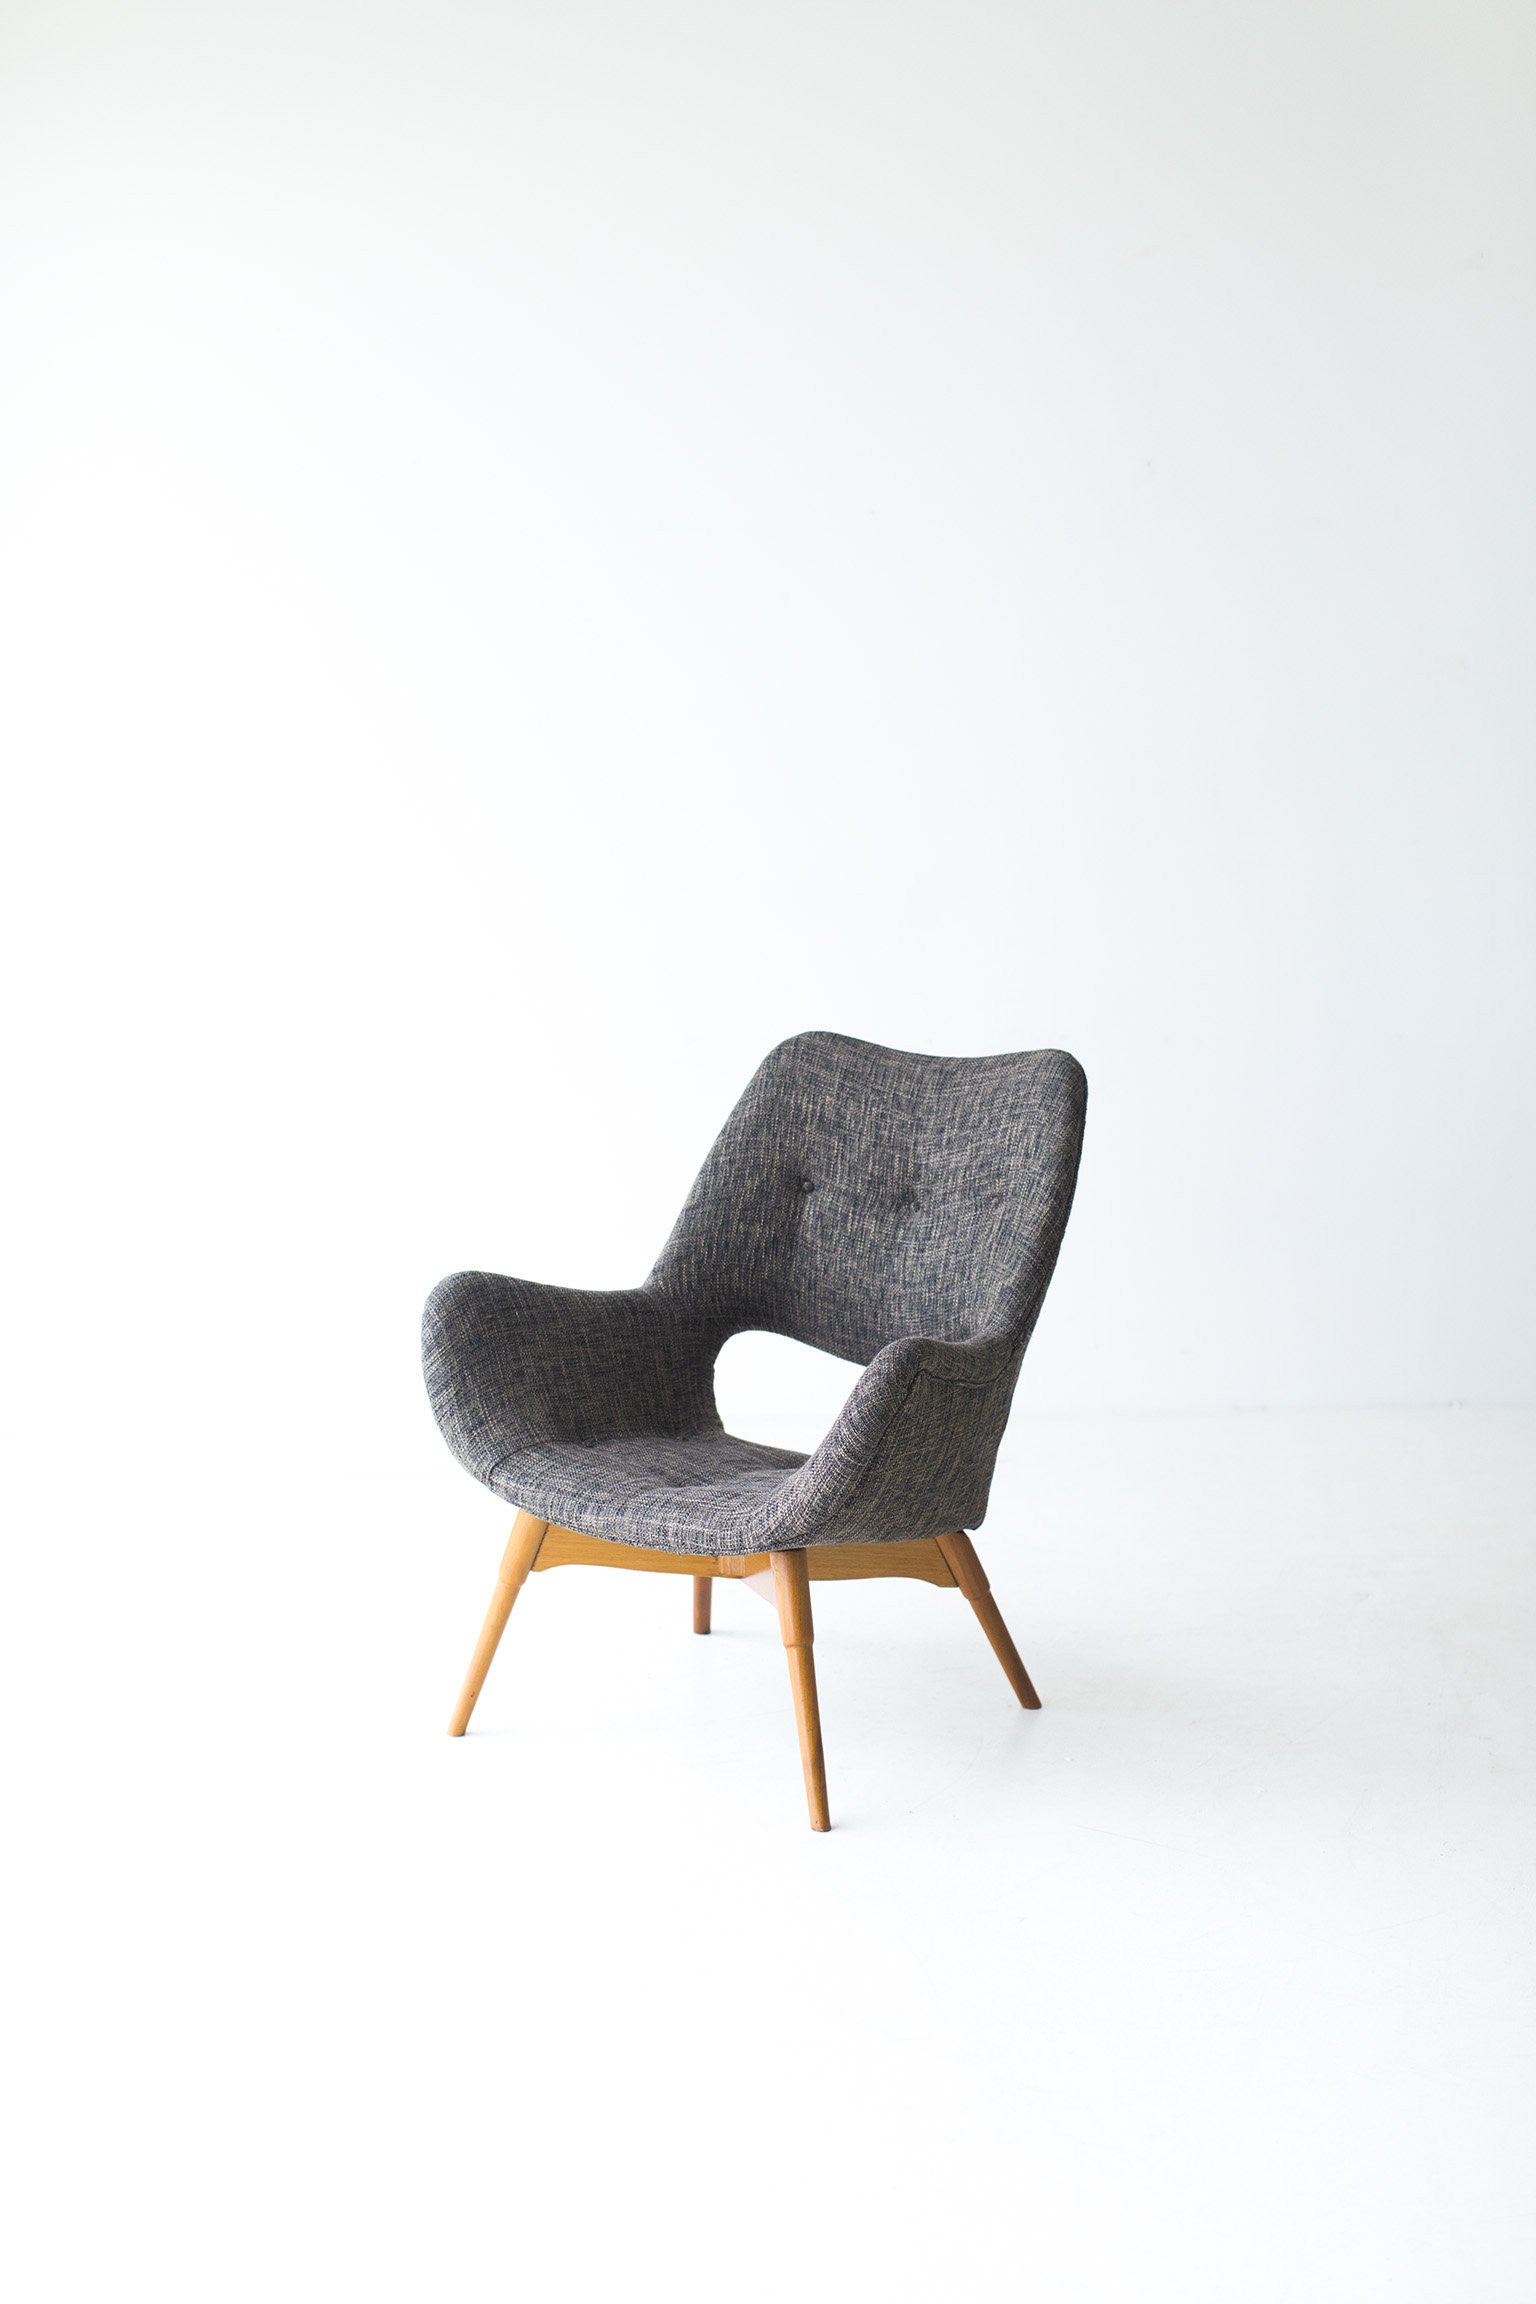 Grant Featherston Lounge Chair - 06121702